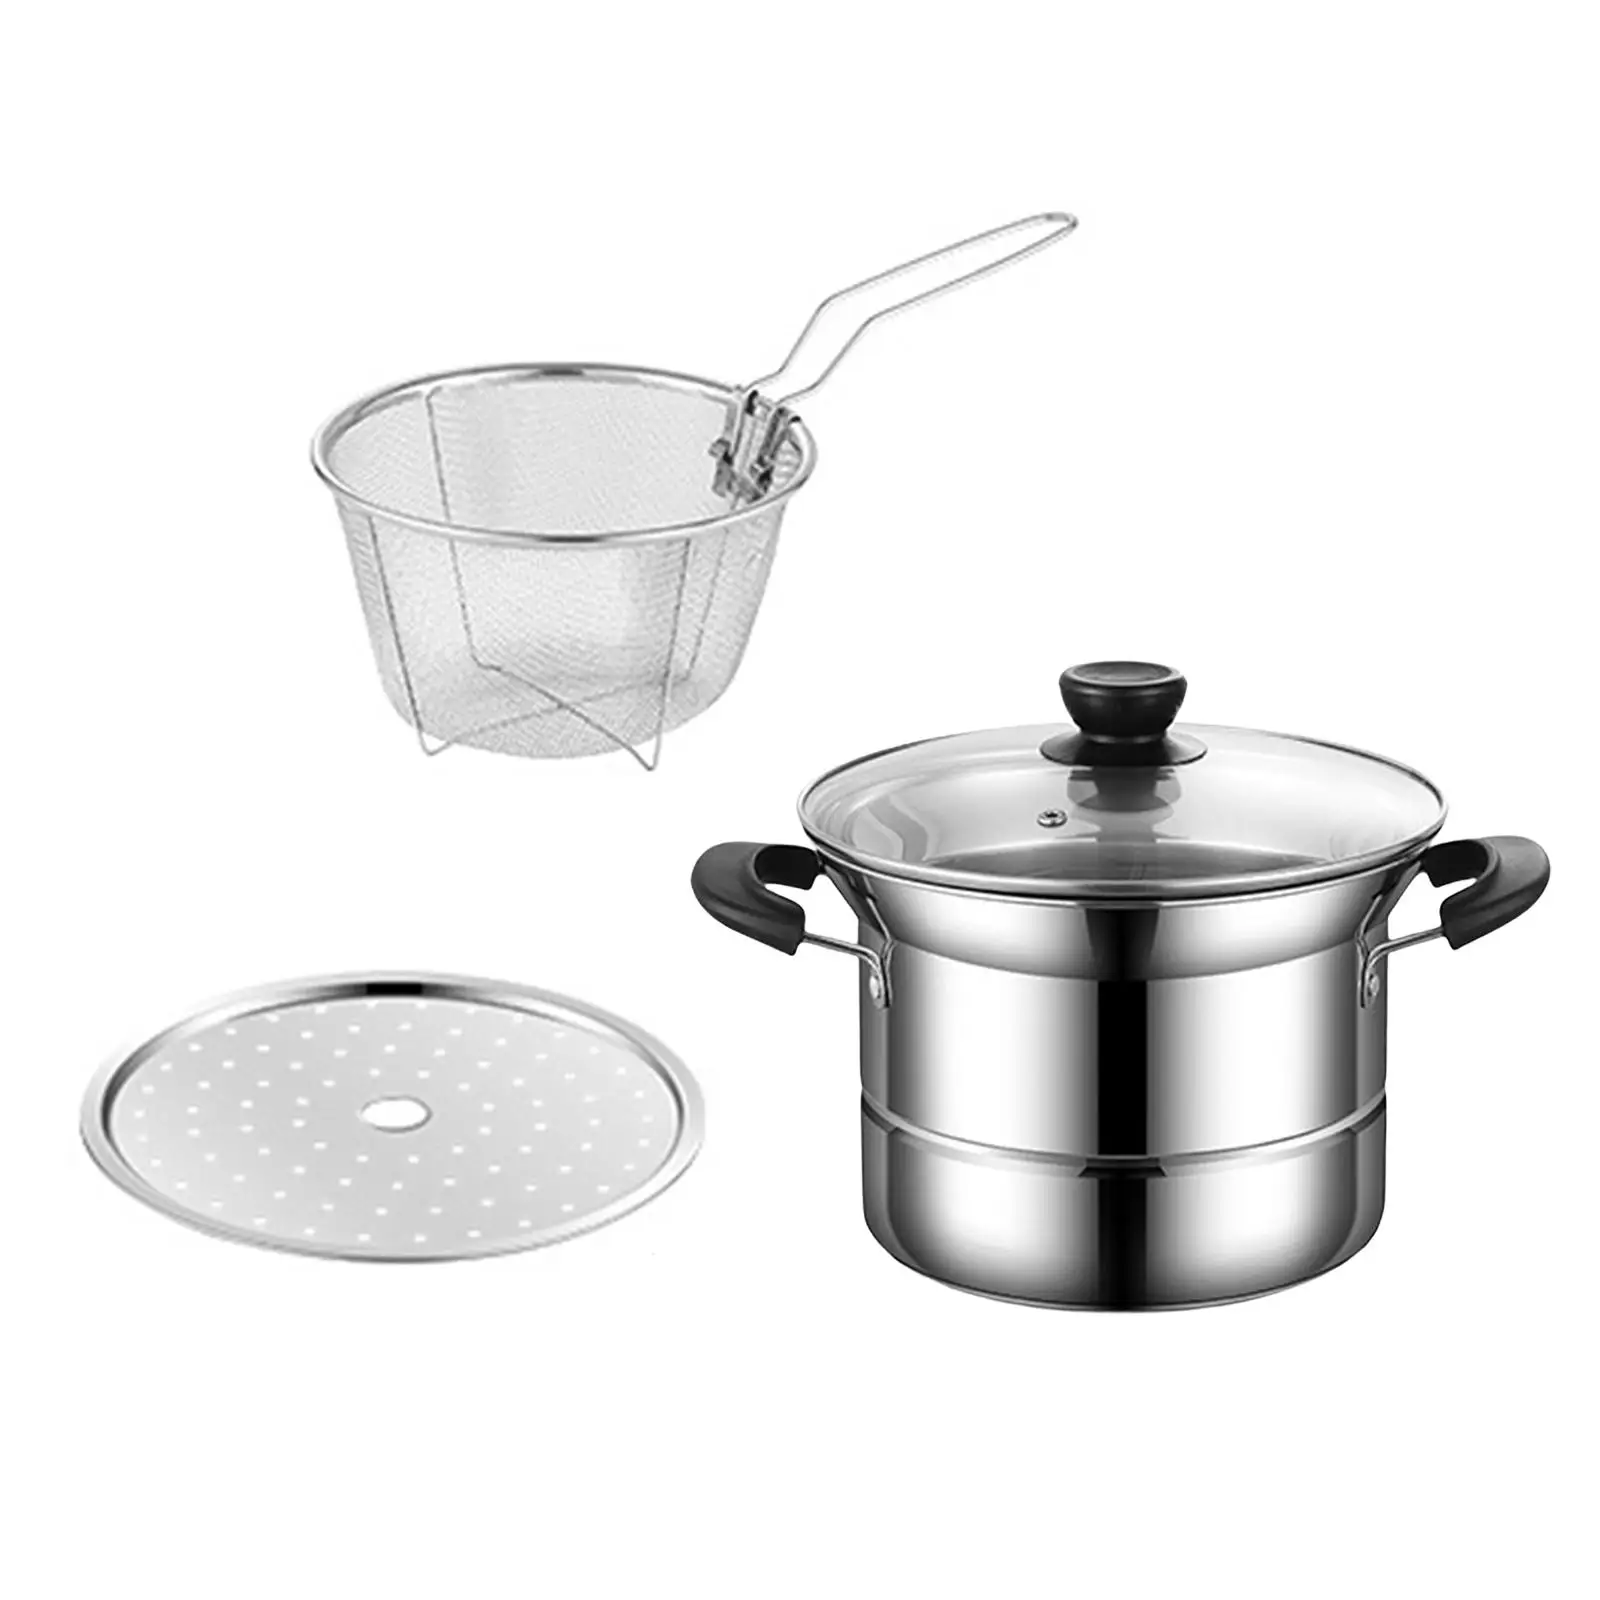 Stainless Steel Saucepan with Glass Lid Handle Milk Pan Kitchenware Cooking Pot for Indoor Outdoor Backpacking Kitchen Cooking